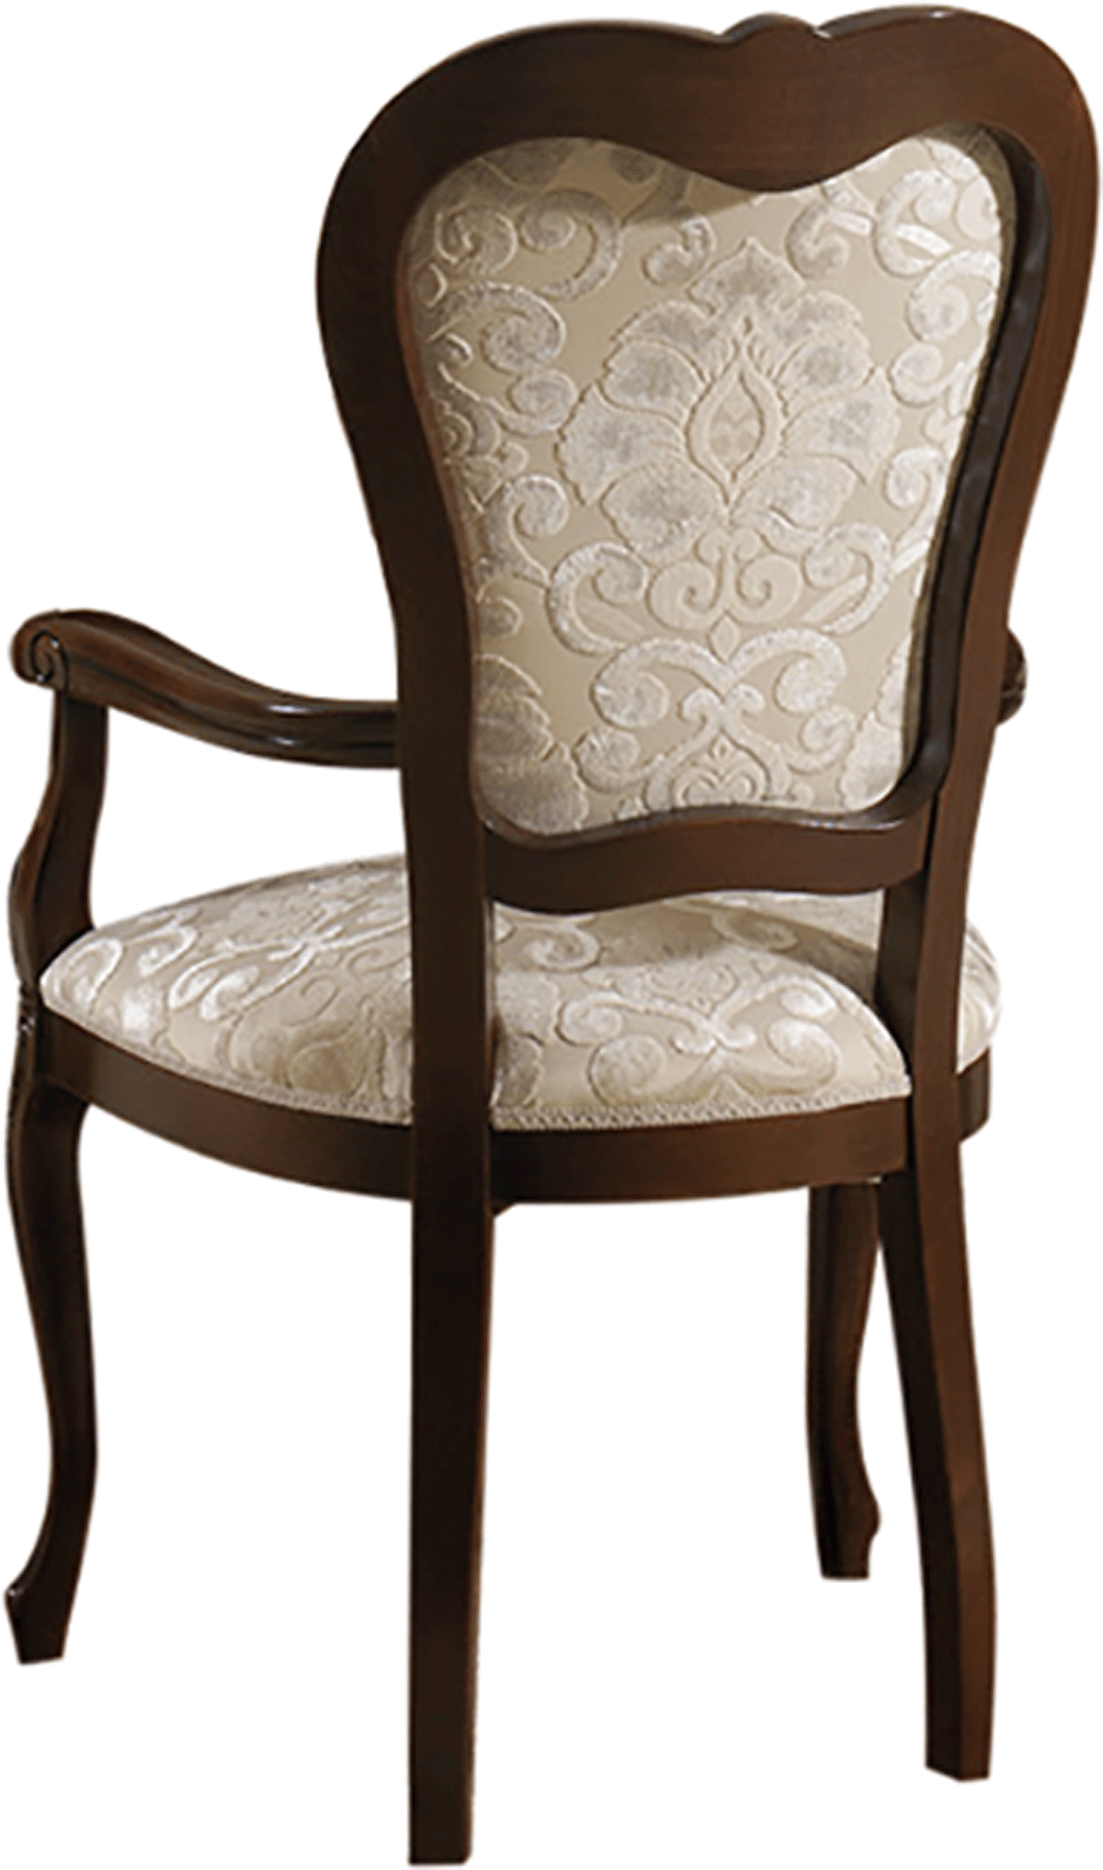 Dining Room Furniture Classic Dining Room Sets Donatello Armchair